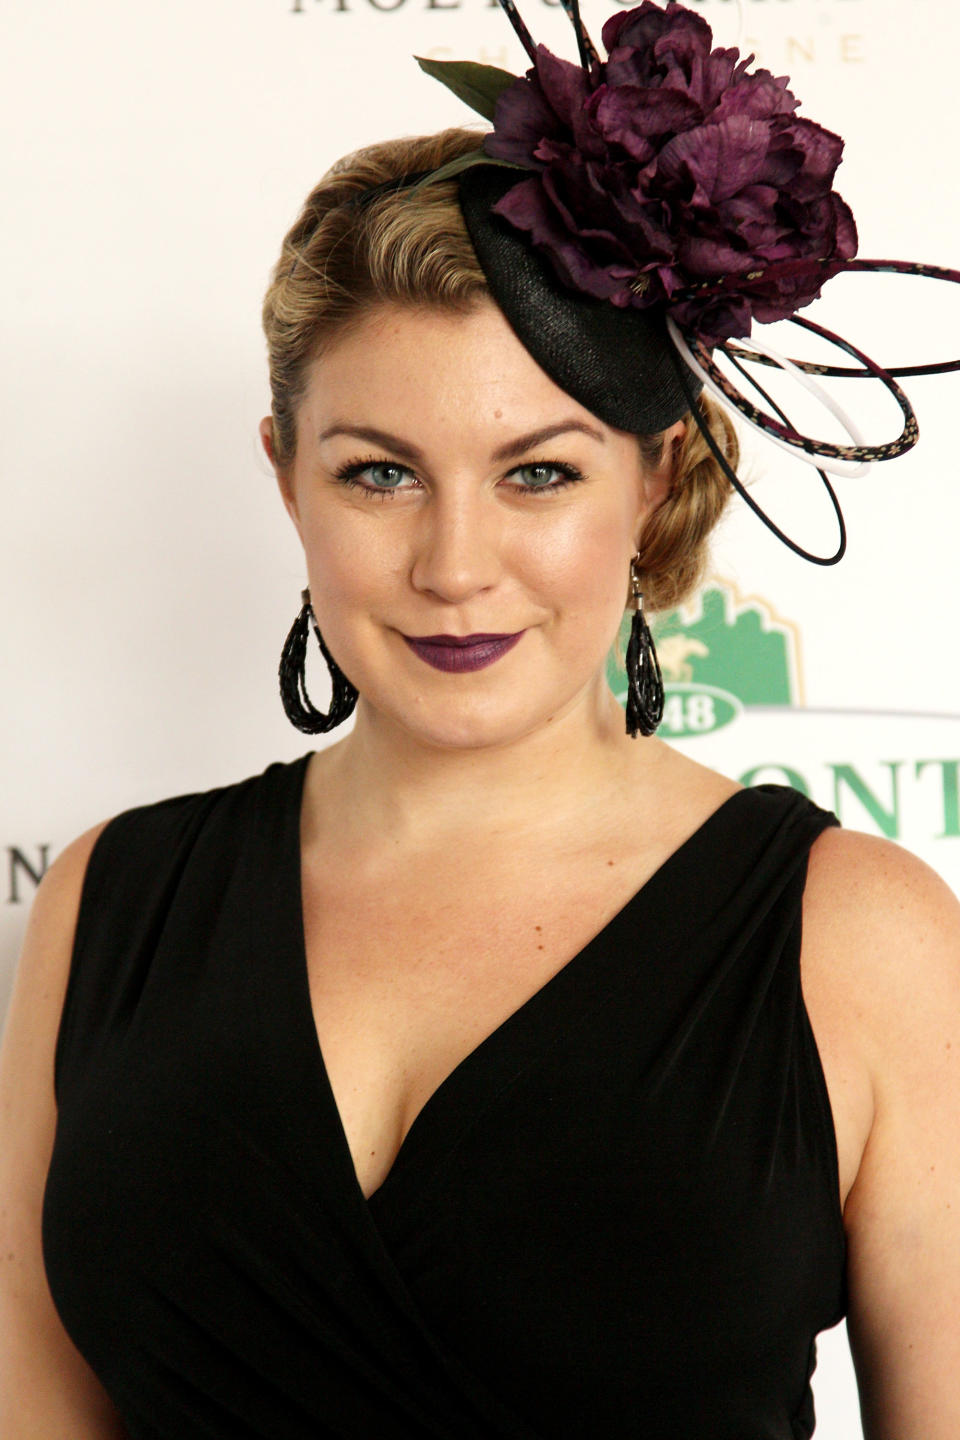 Miss America 2013 Mallory Hagan (pictured in 2016) could be headed to Congress. (Photo: Steve Mack/WireImage)